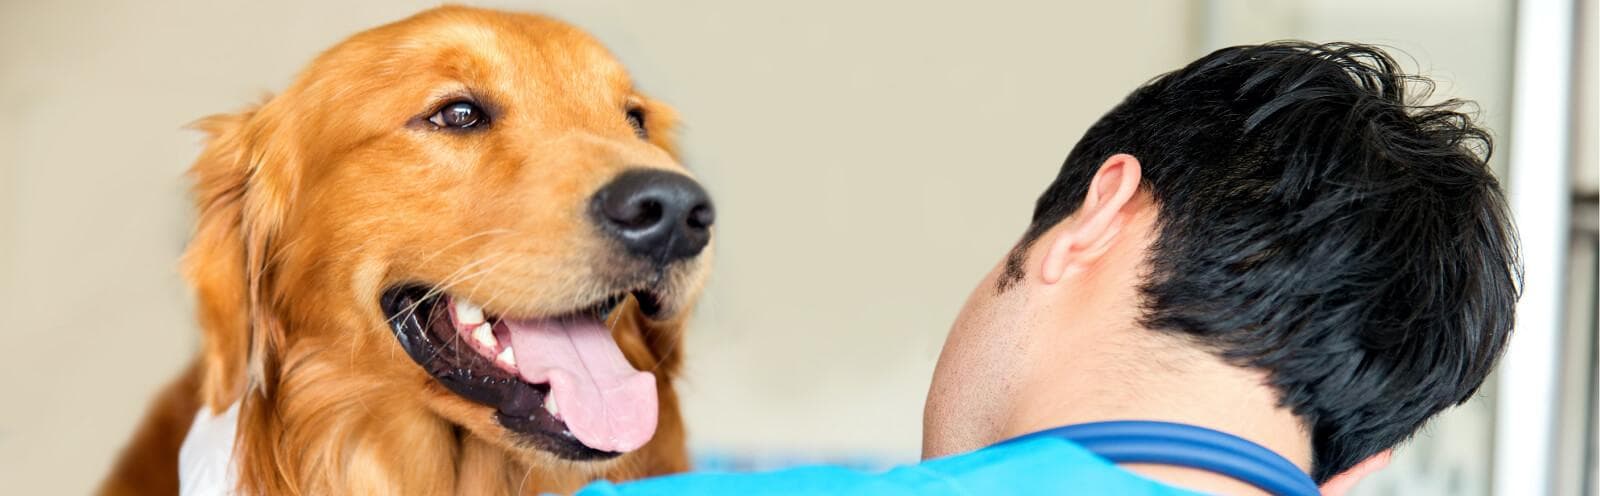 Veterinarian working on a dog